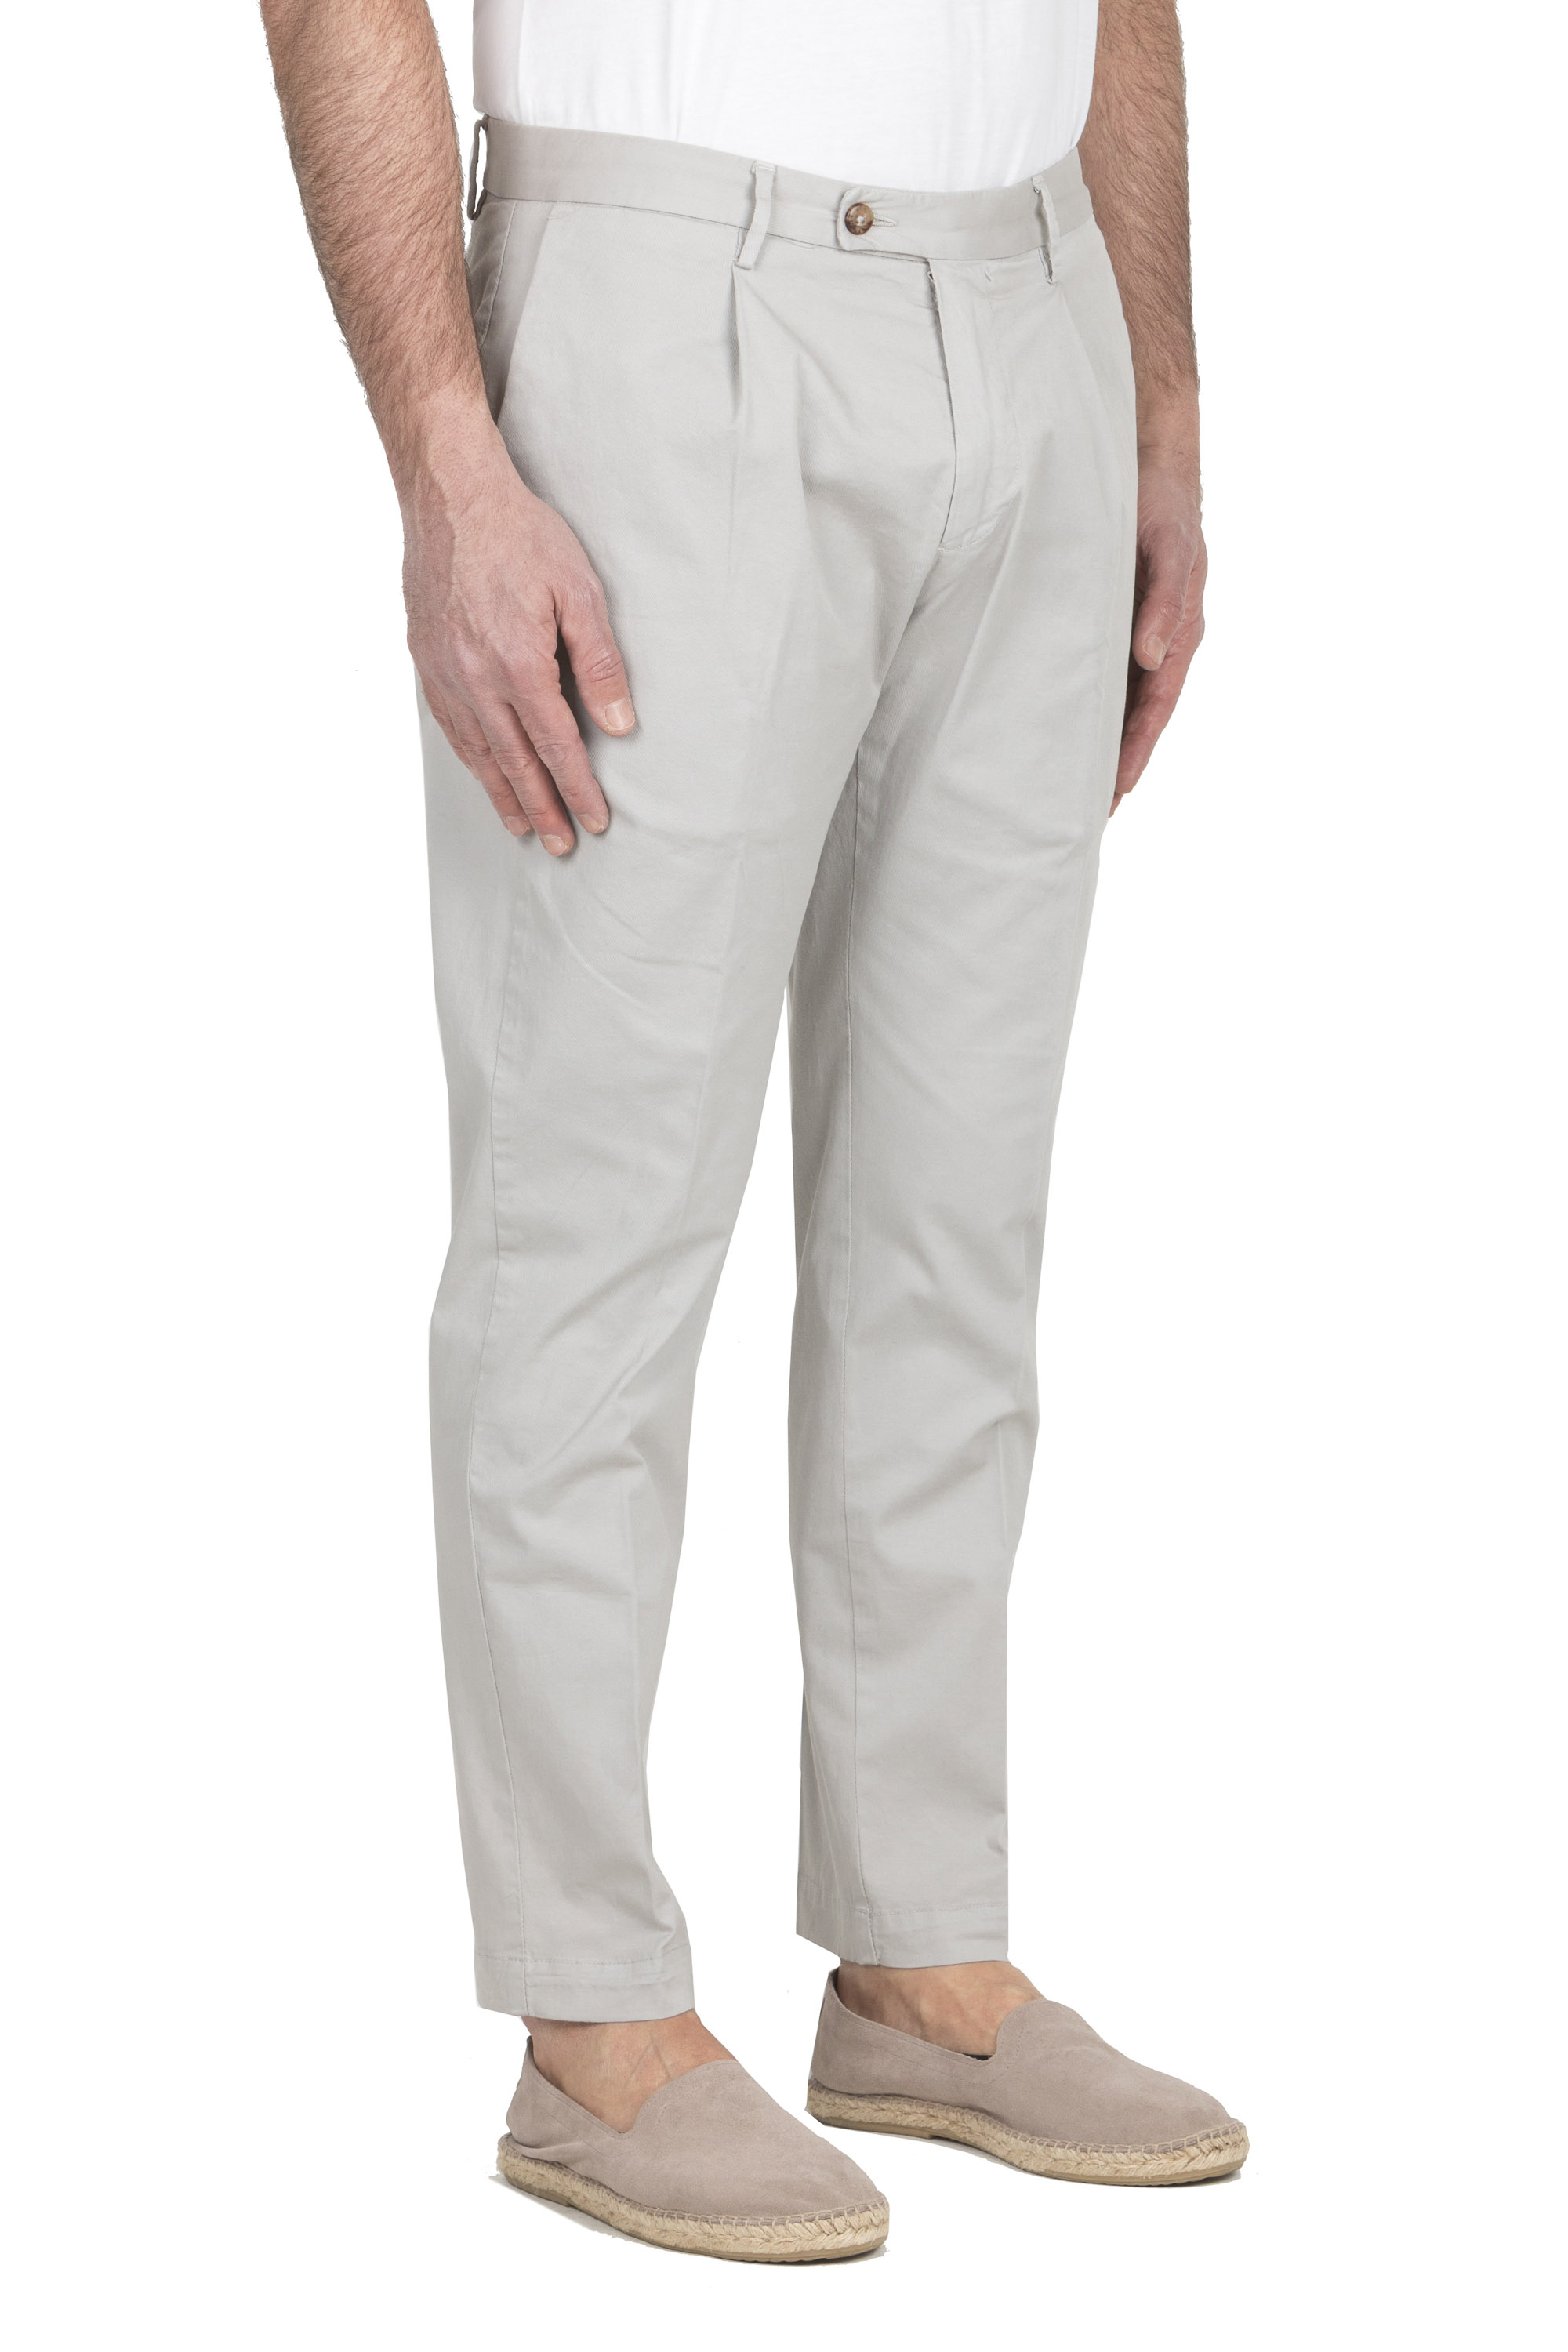 SBU Collection Summer 2022 Trousers